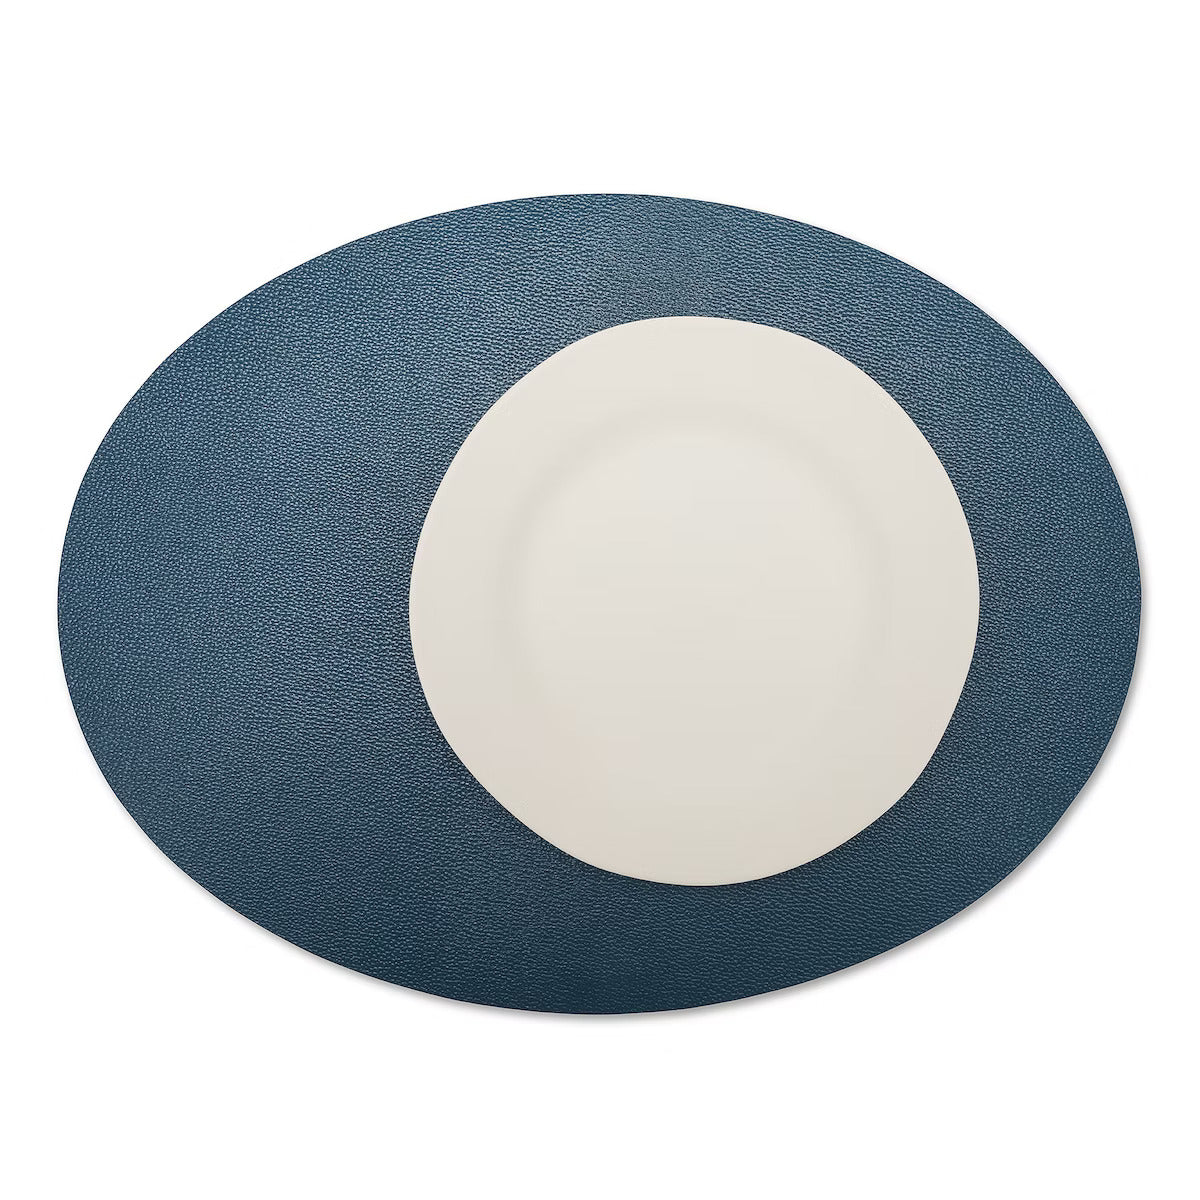 A large oval textured washable paper placemat in navy is shown under a white plate.